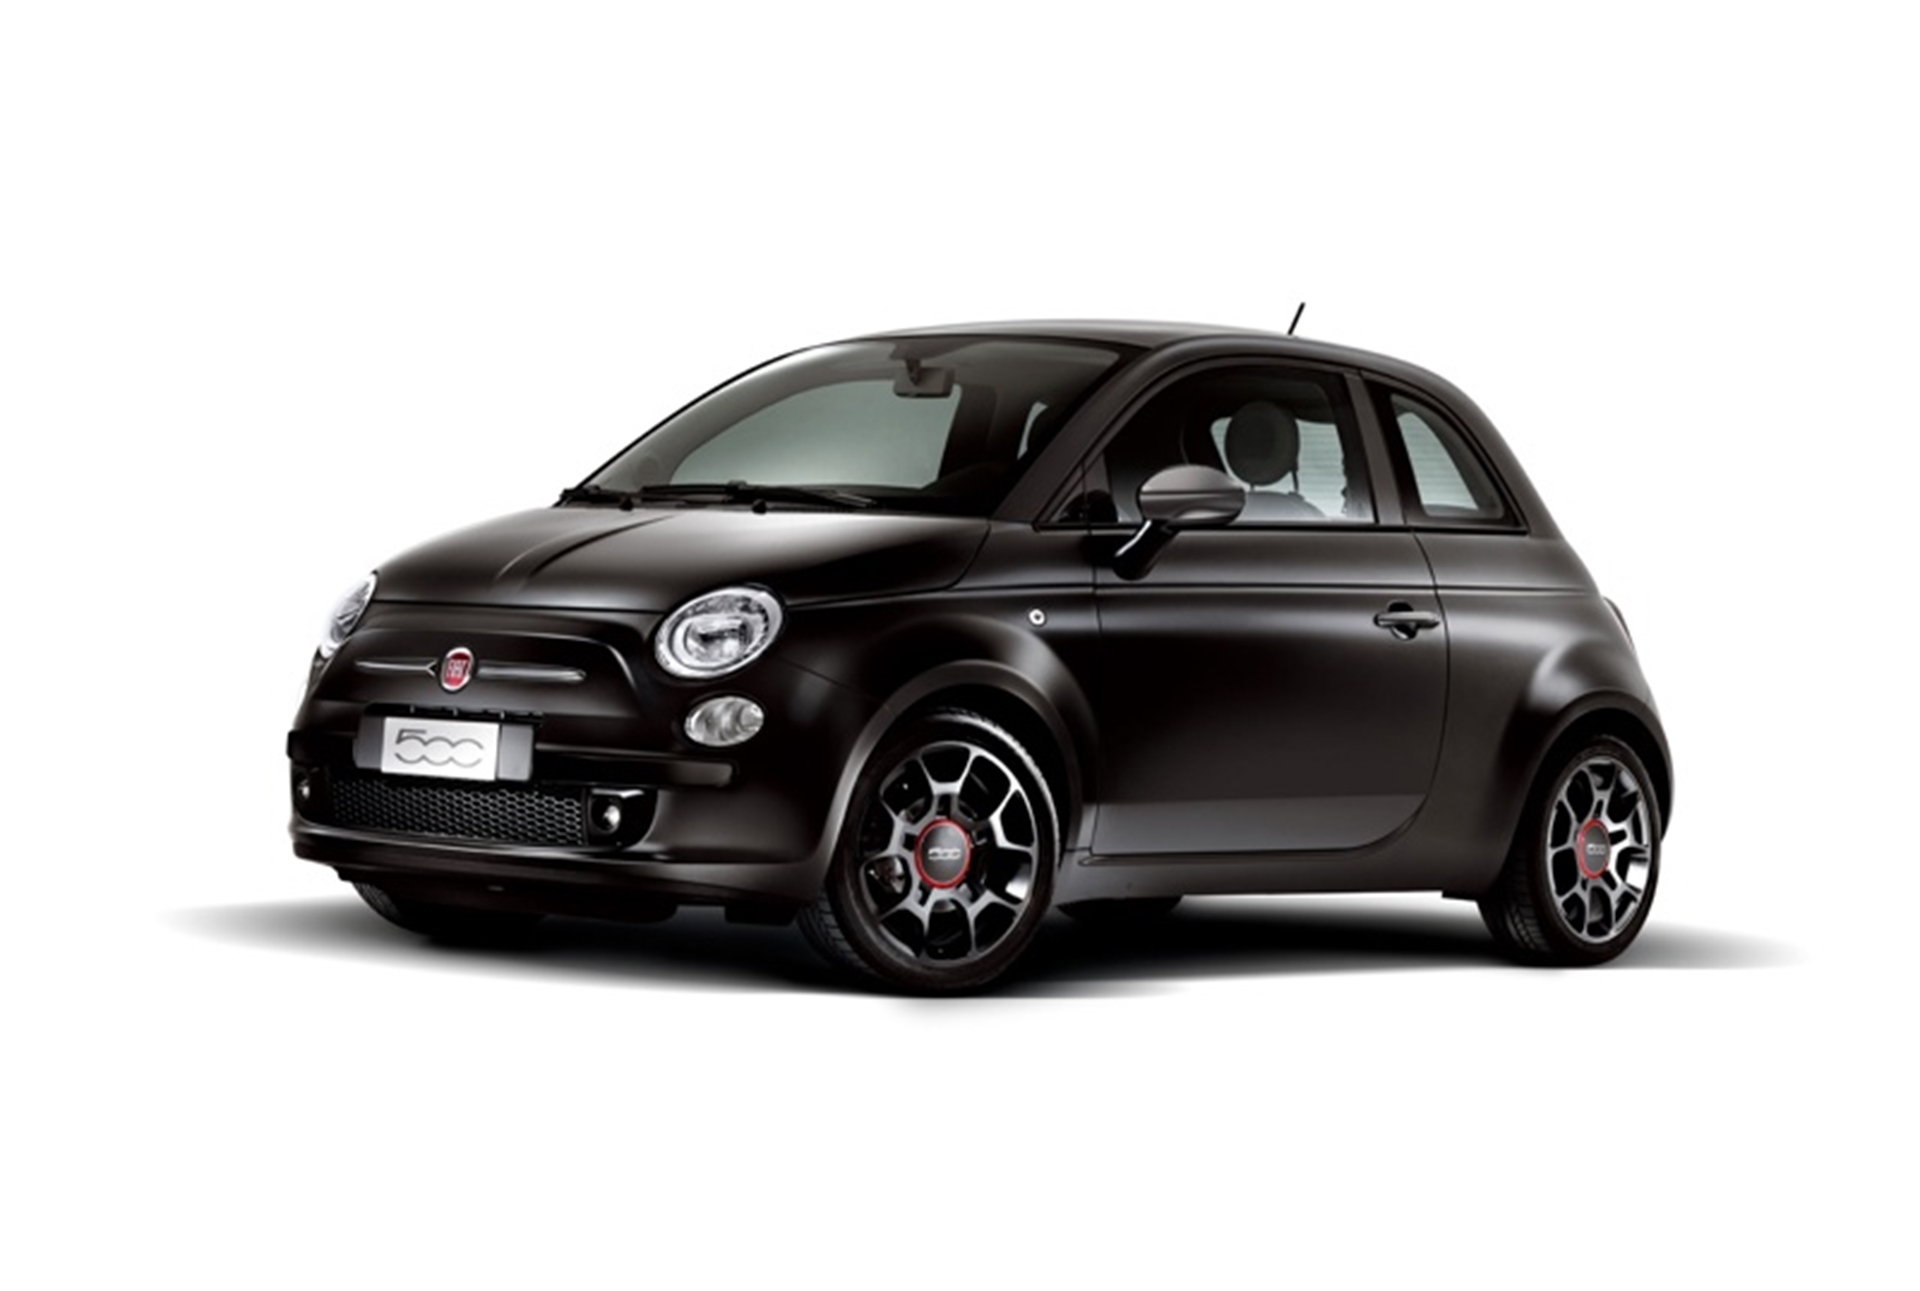 Fiat 500 Special Edition Is Back – And This Time It’s Black